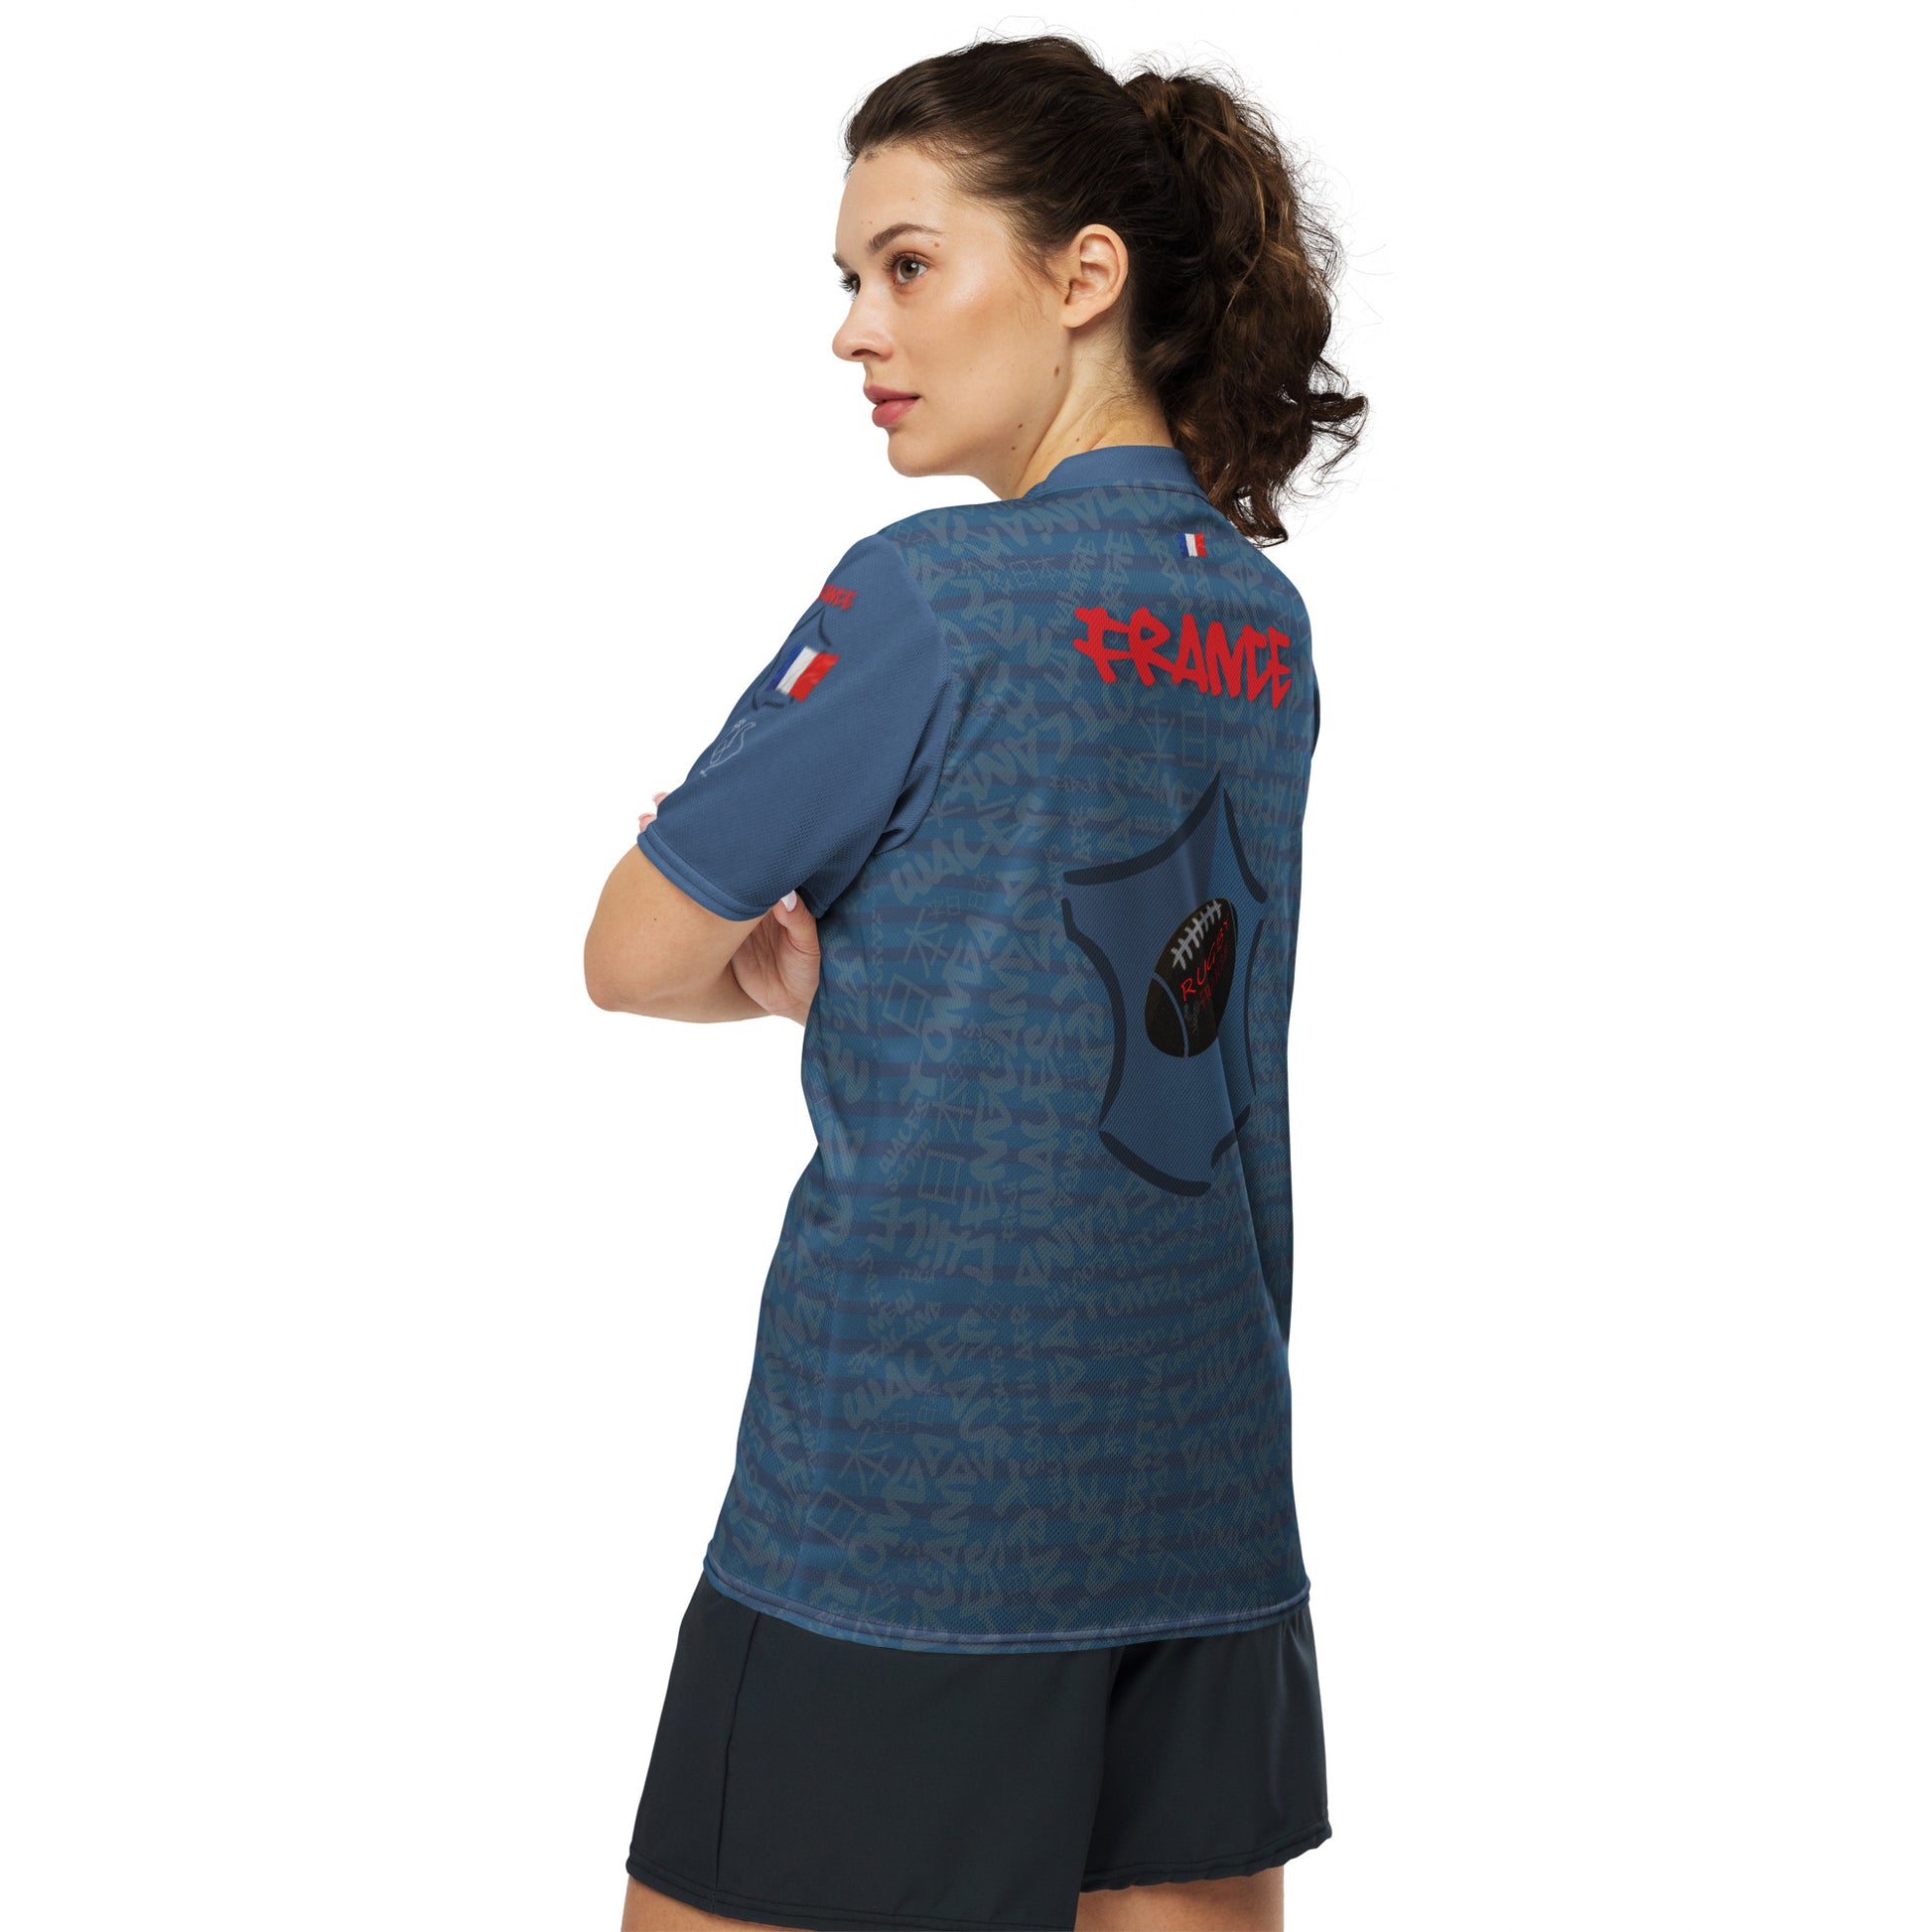 maillot jomelo rugby france